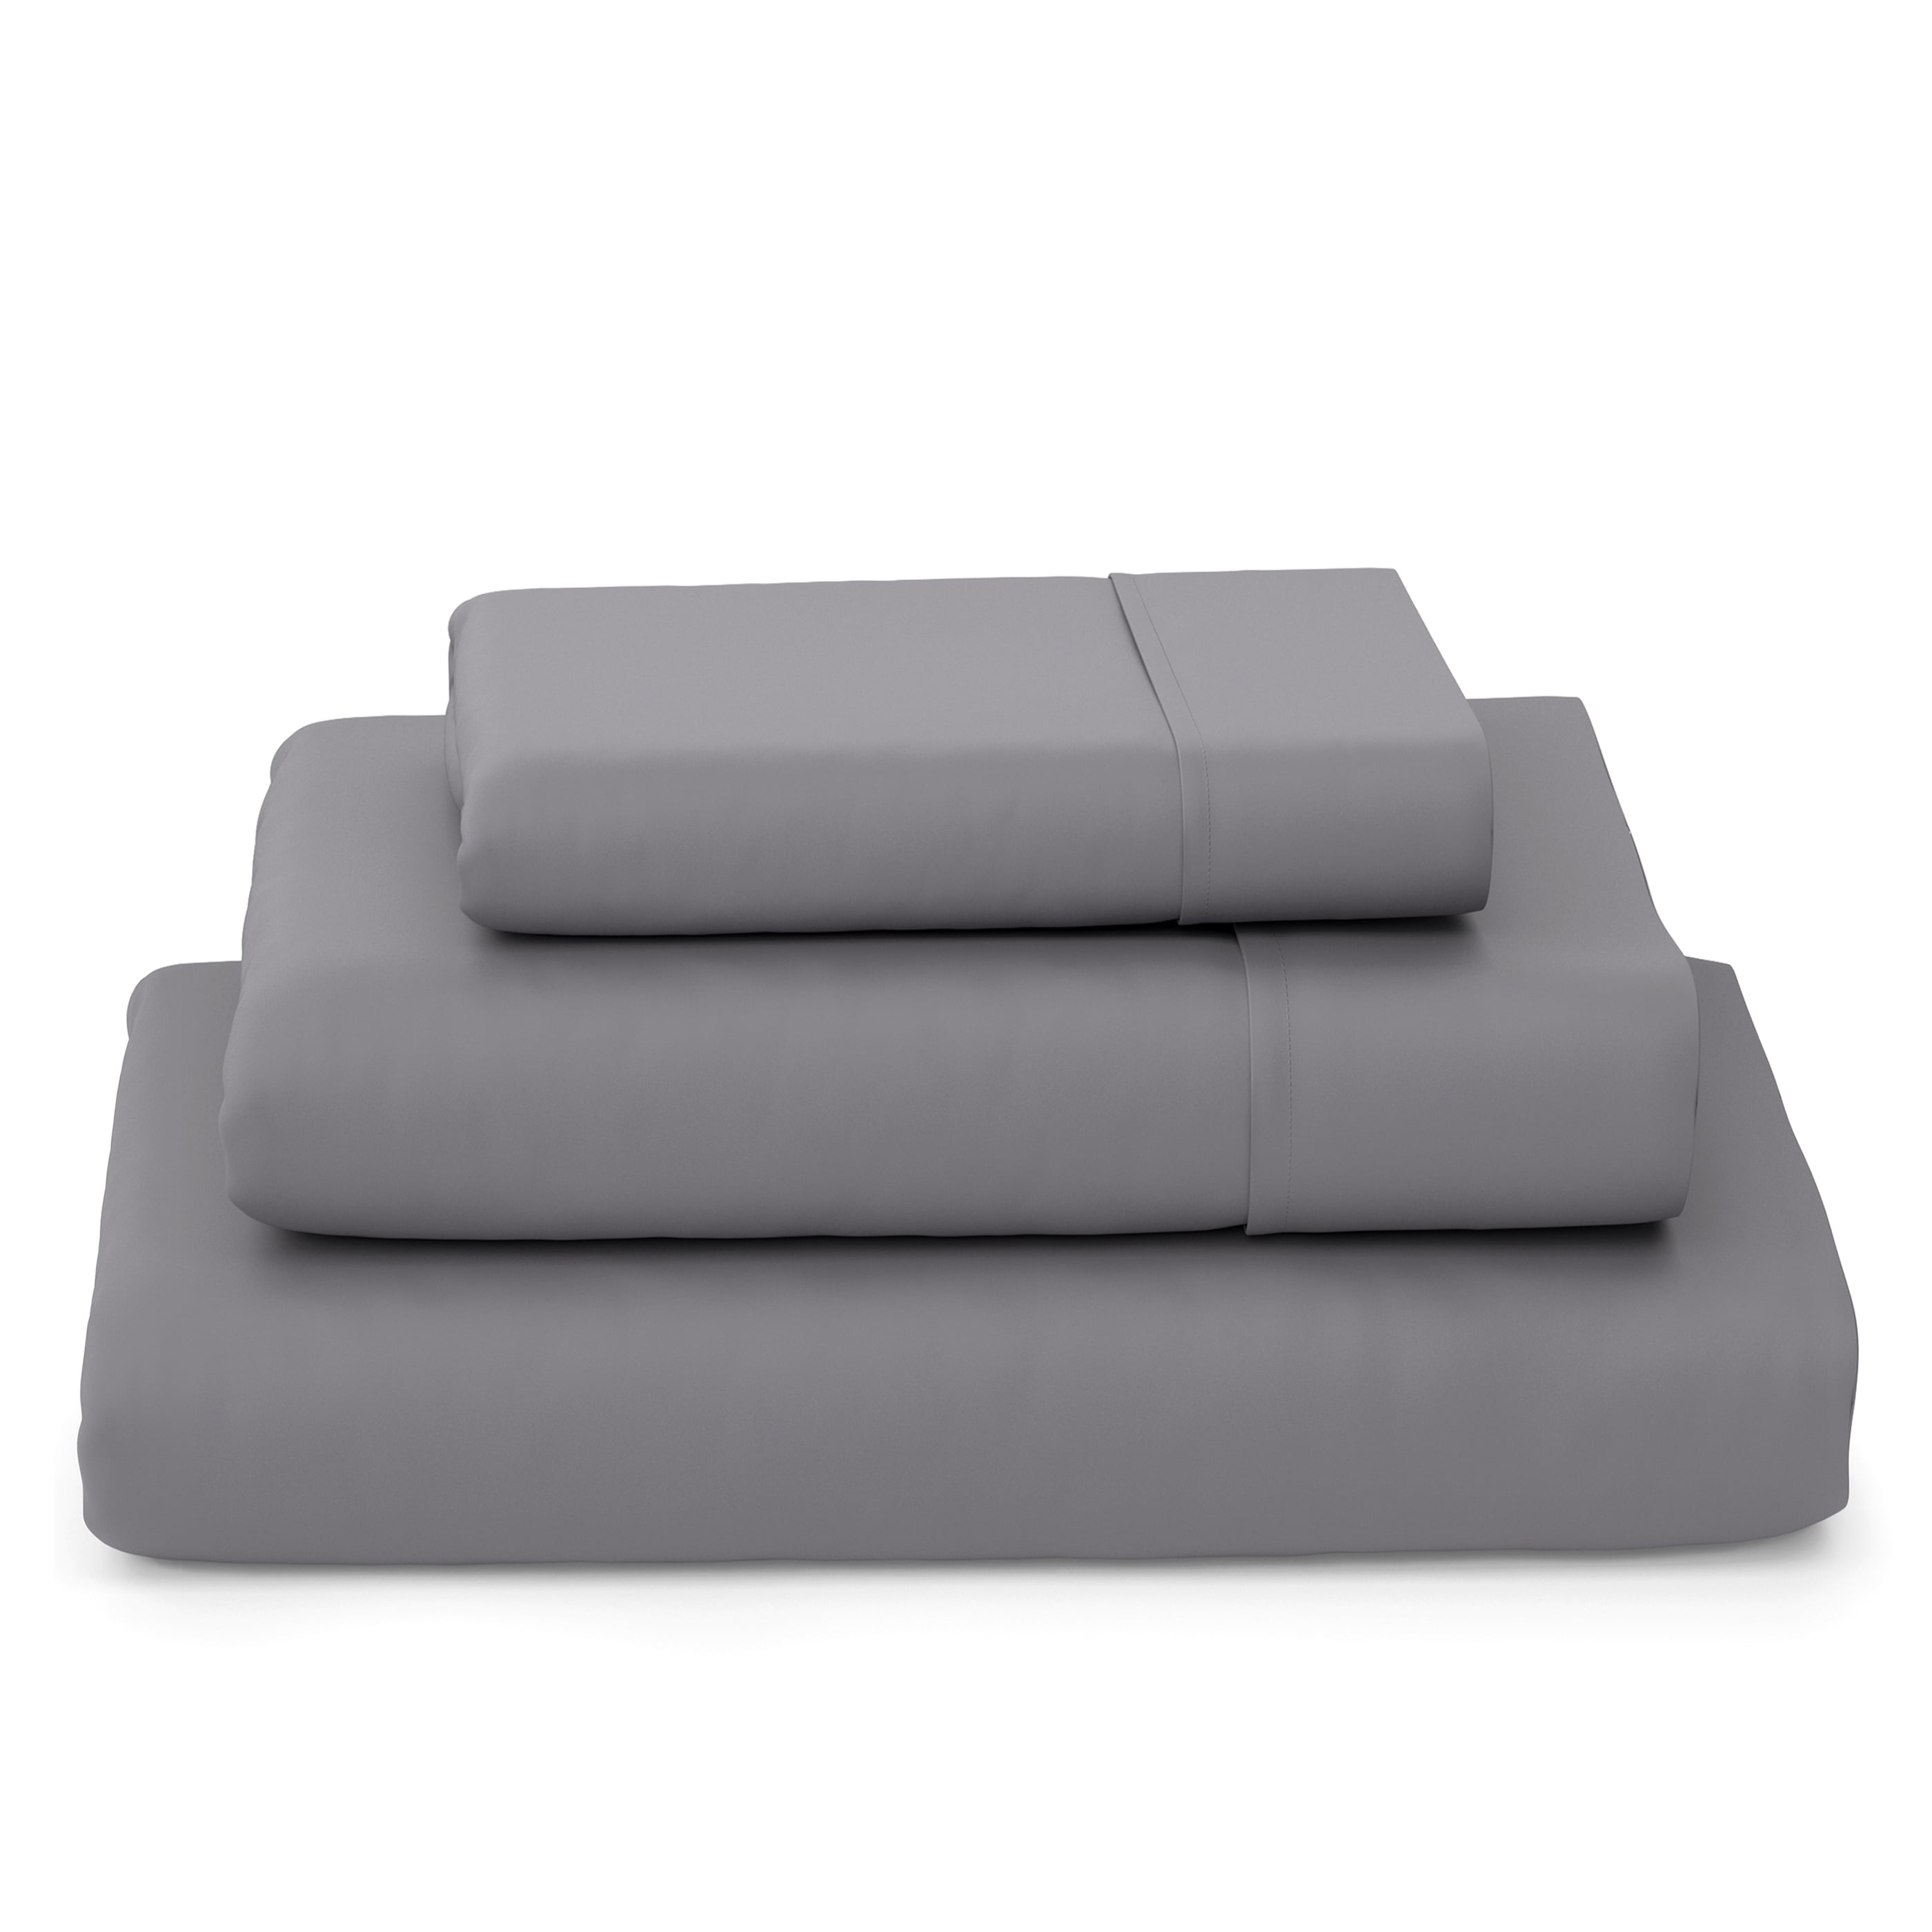 Cosy House Collection Luxury Bamboo 3 Piece Sheet Set - Twin - Silver